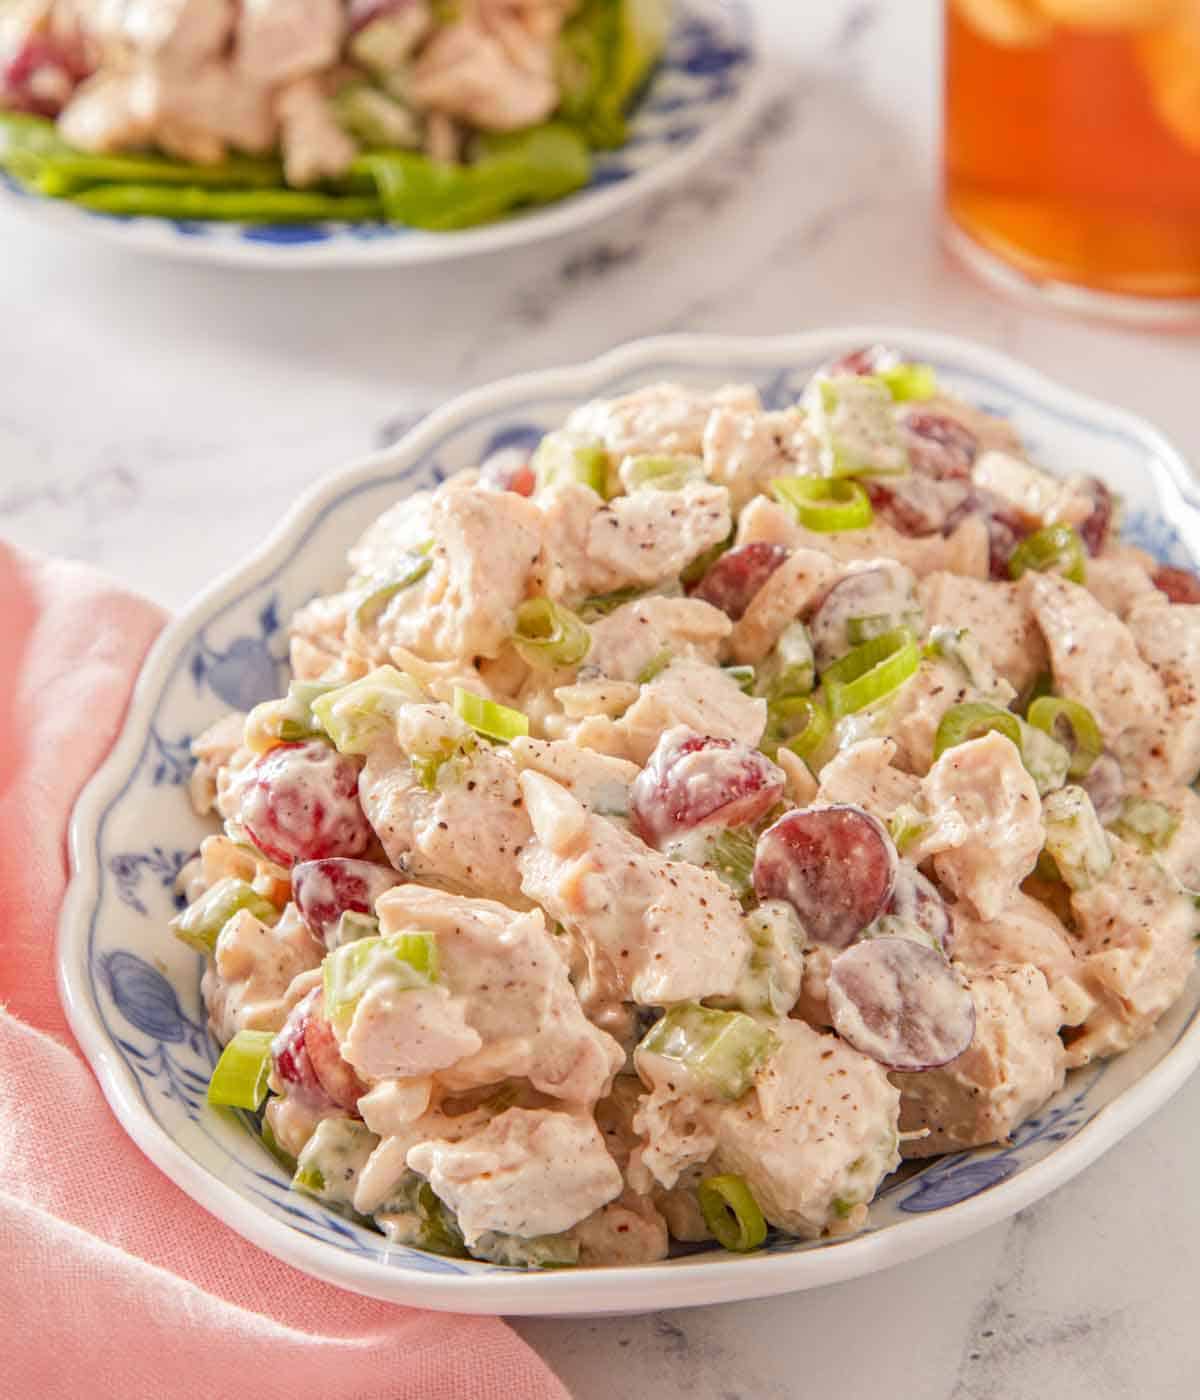 A small platter of chicken salad with gree onions on top.